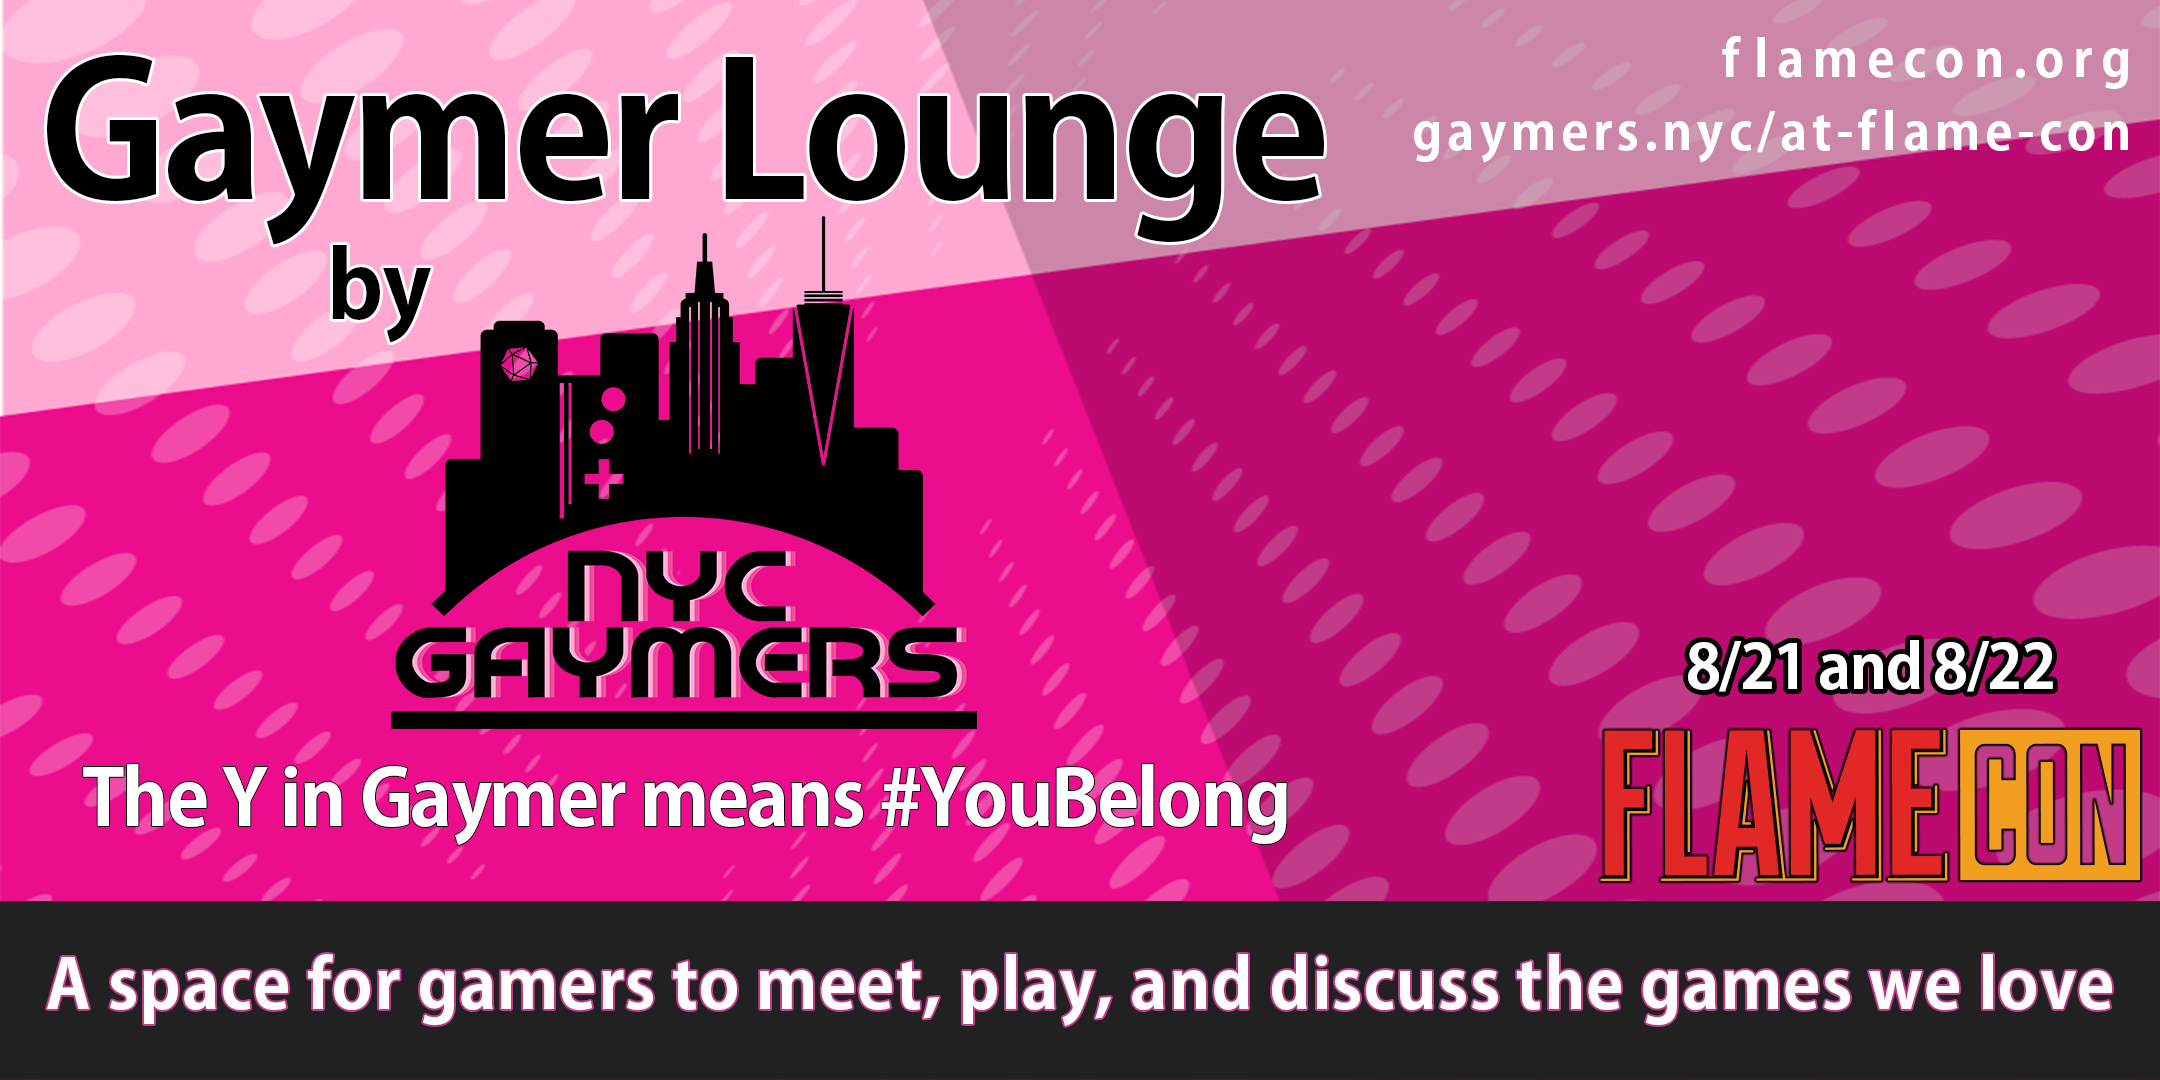 Gaymer Lounge at Flame Con — NYC Gaymers